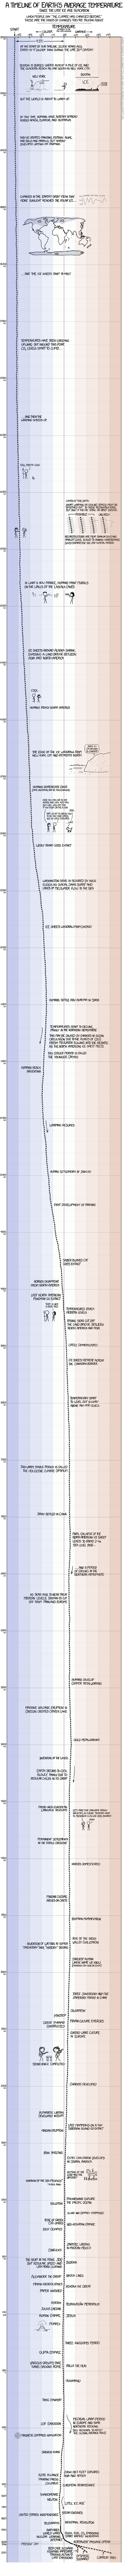 xkcd Timeline of Average Earth Temperature